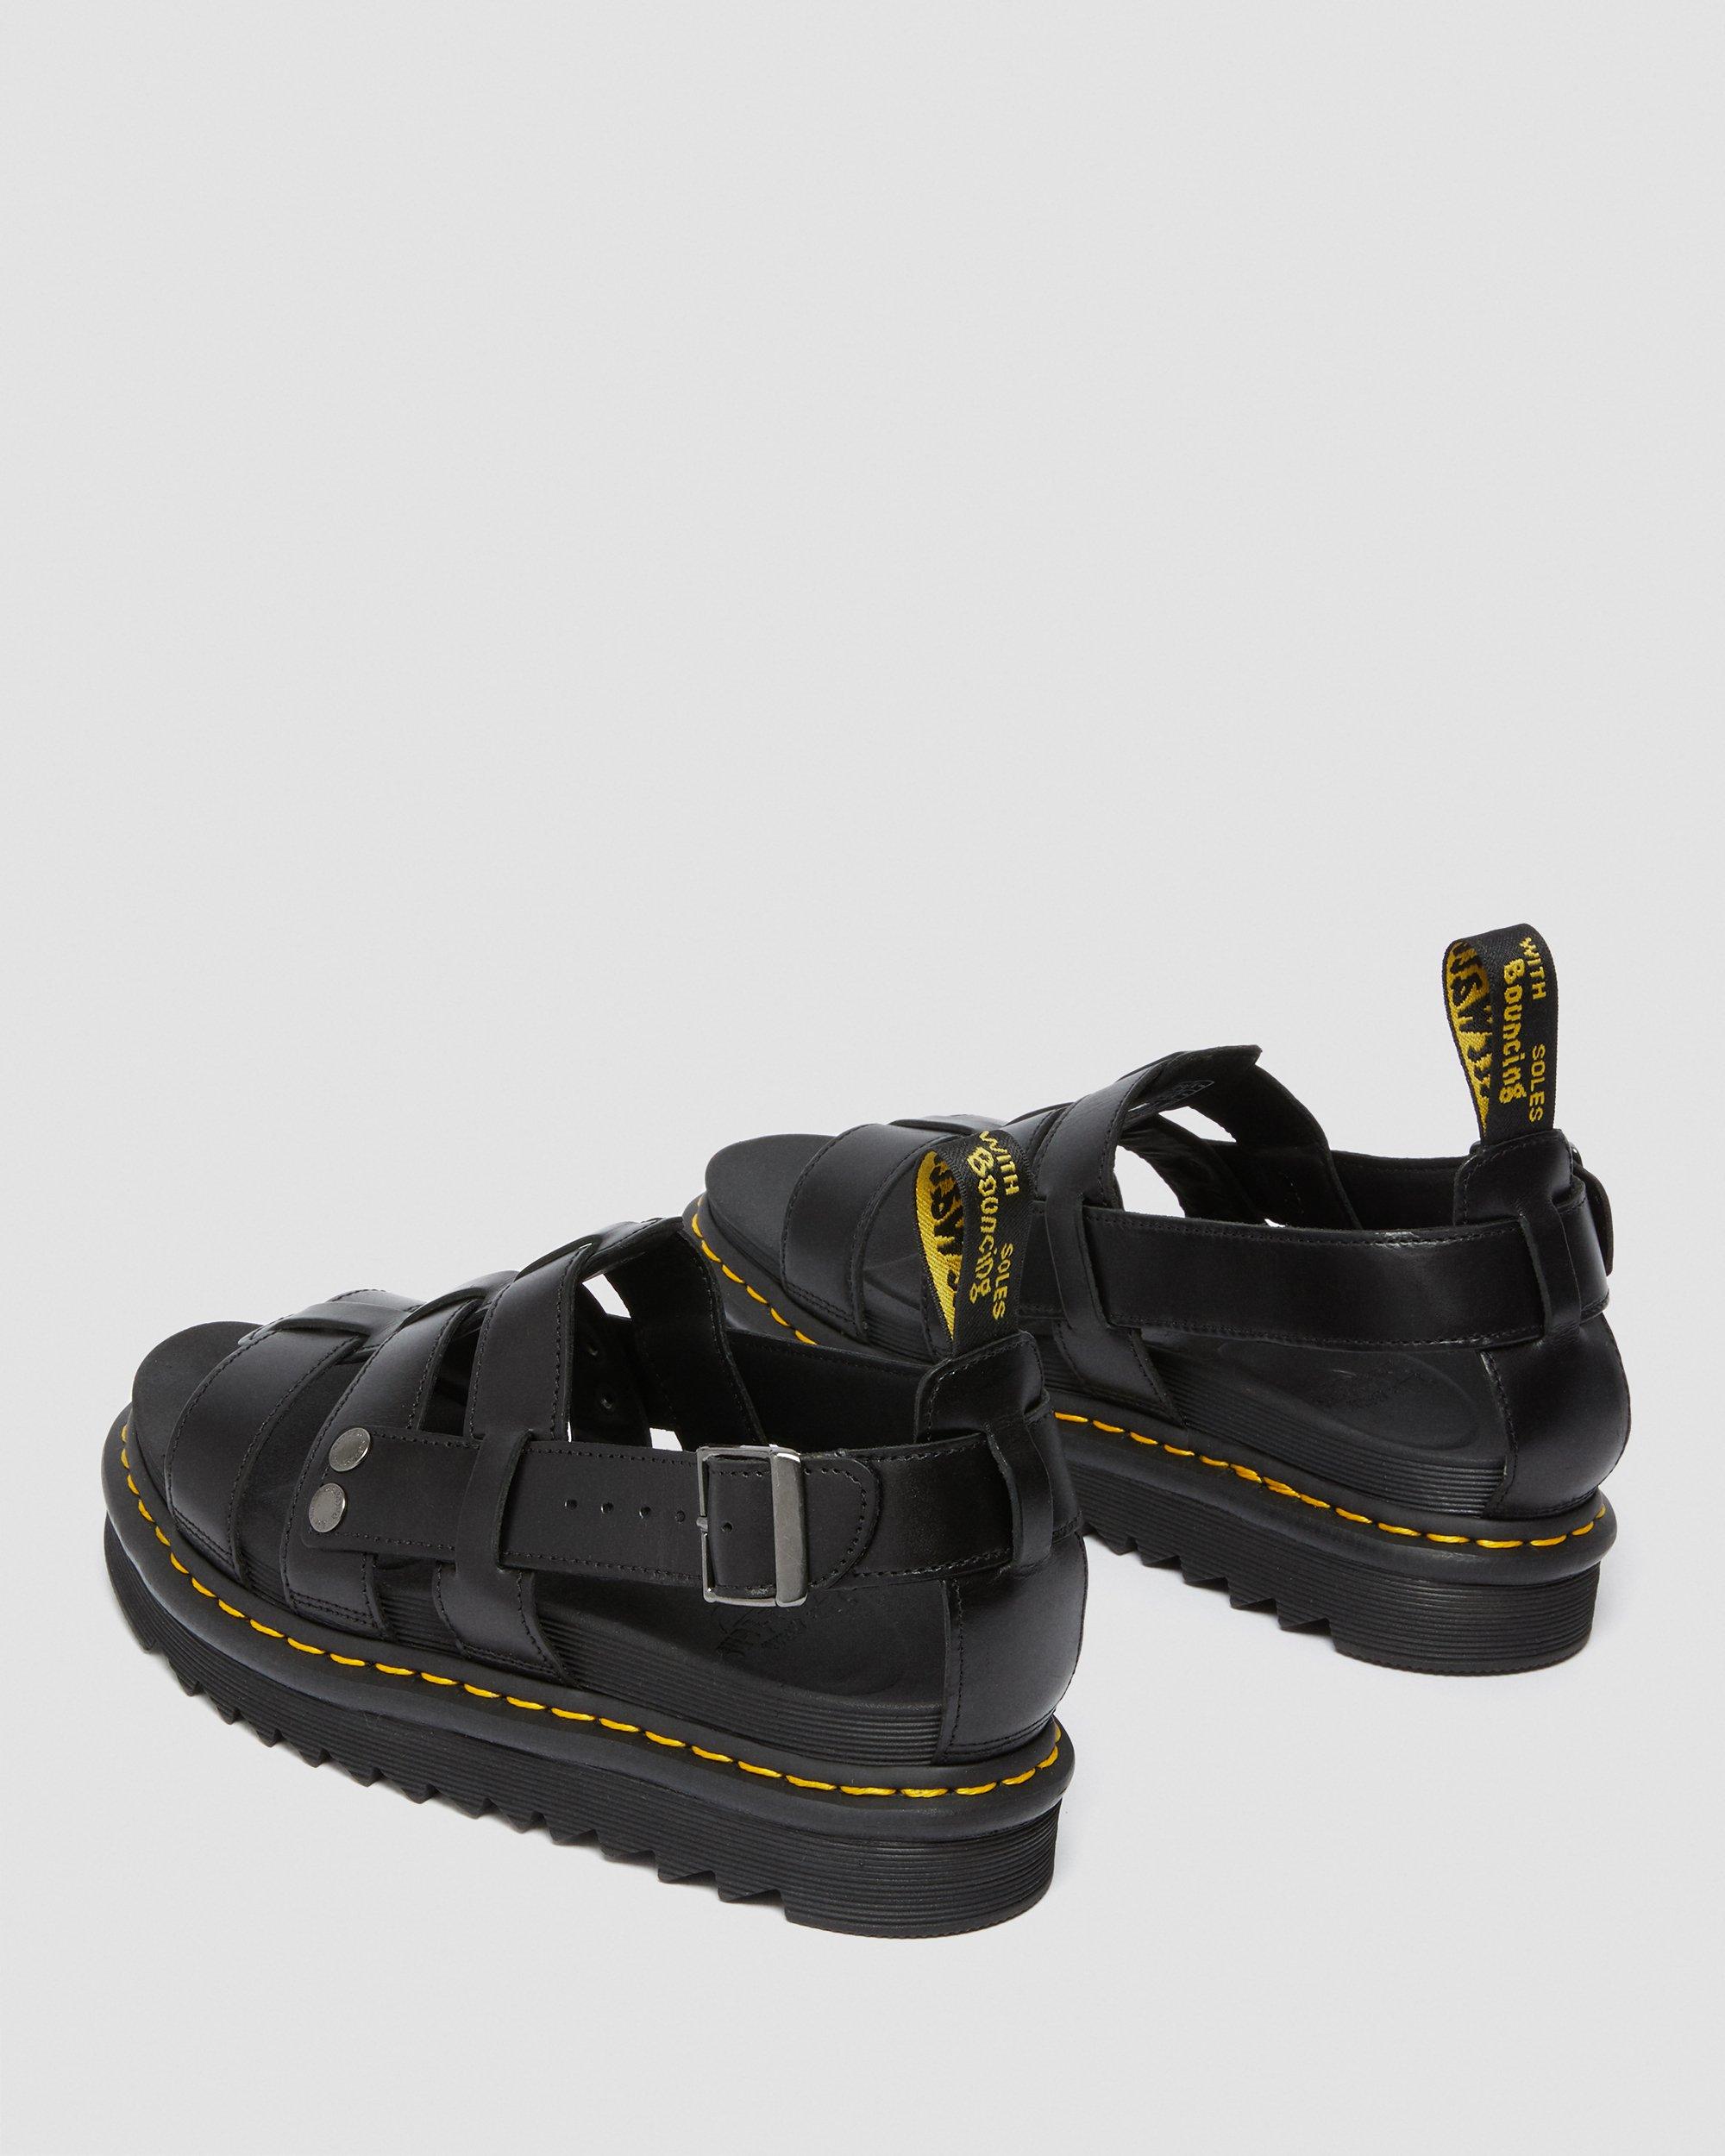 DR MARTENS Terry Leather Strap Sandals